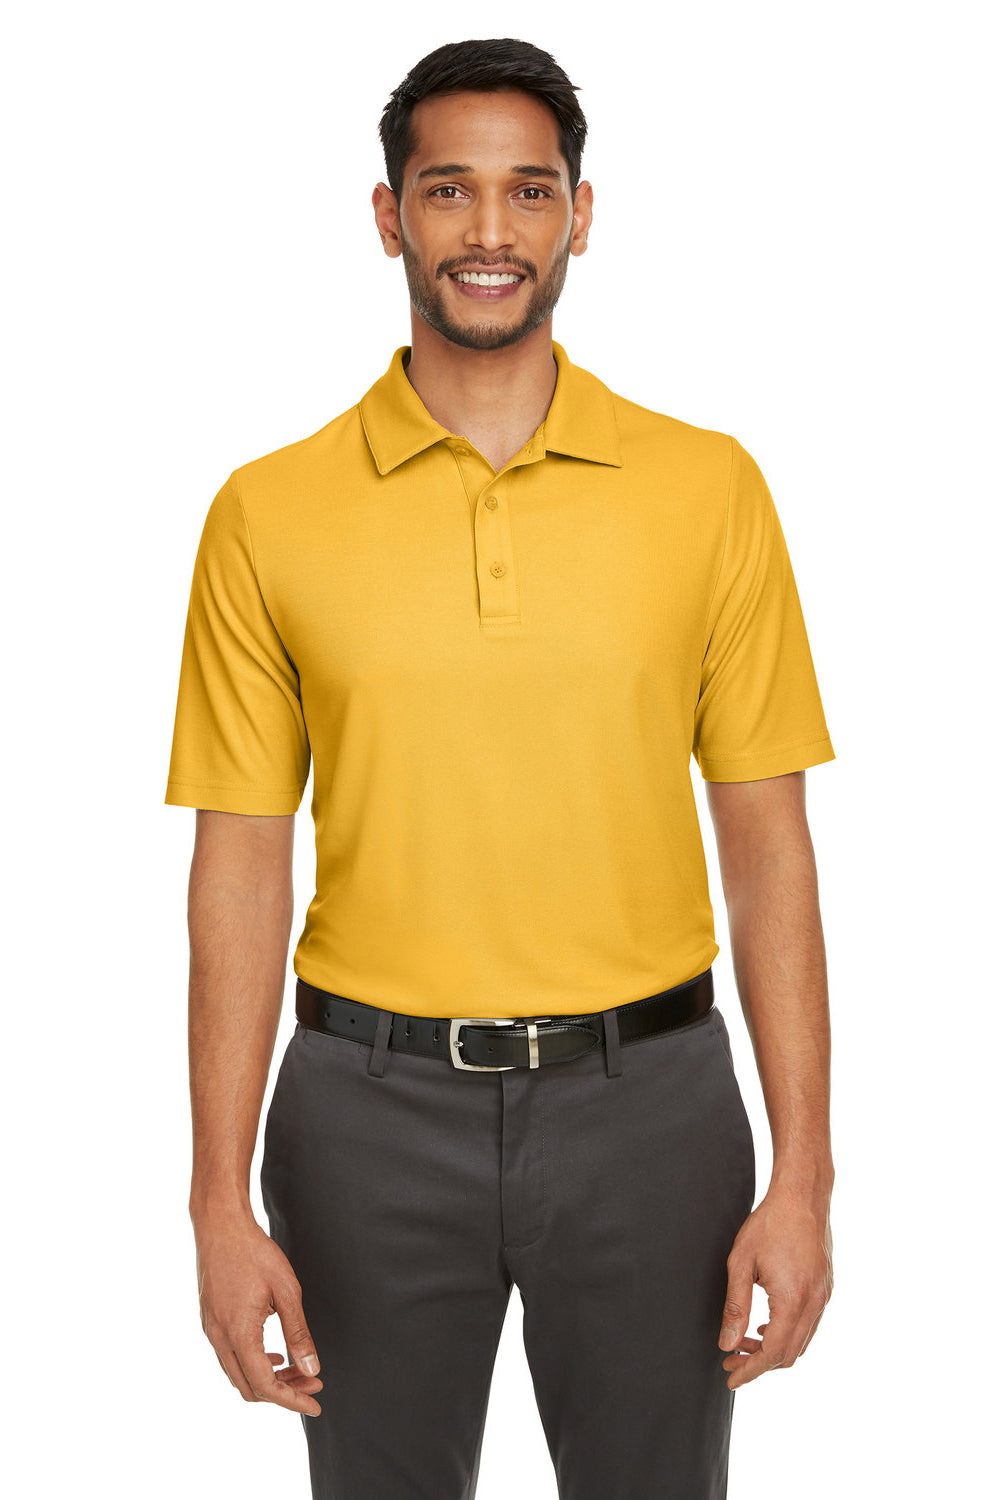 Core 365 CE112 Mens Fusion ChromaSoft Performance Moisture Wicking Short Sleeve Polo Shirt Campus Gold Front